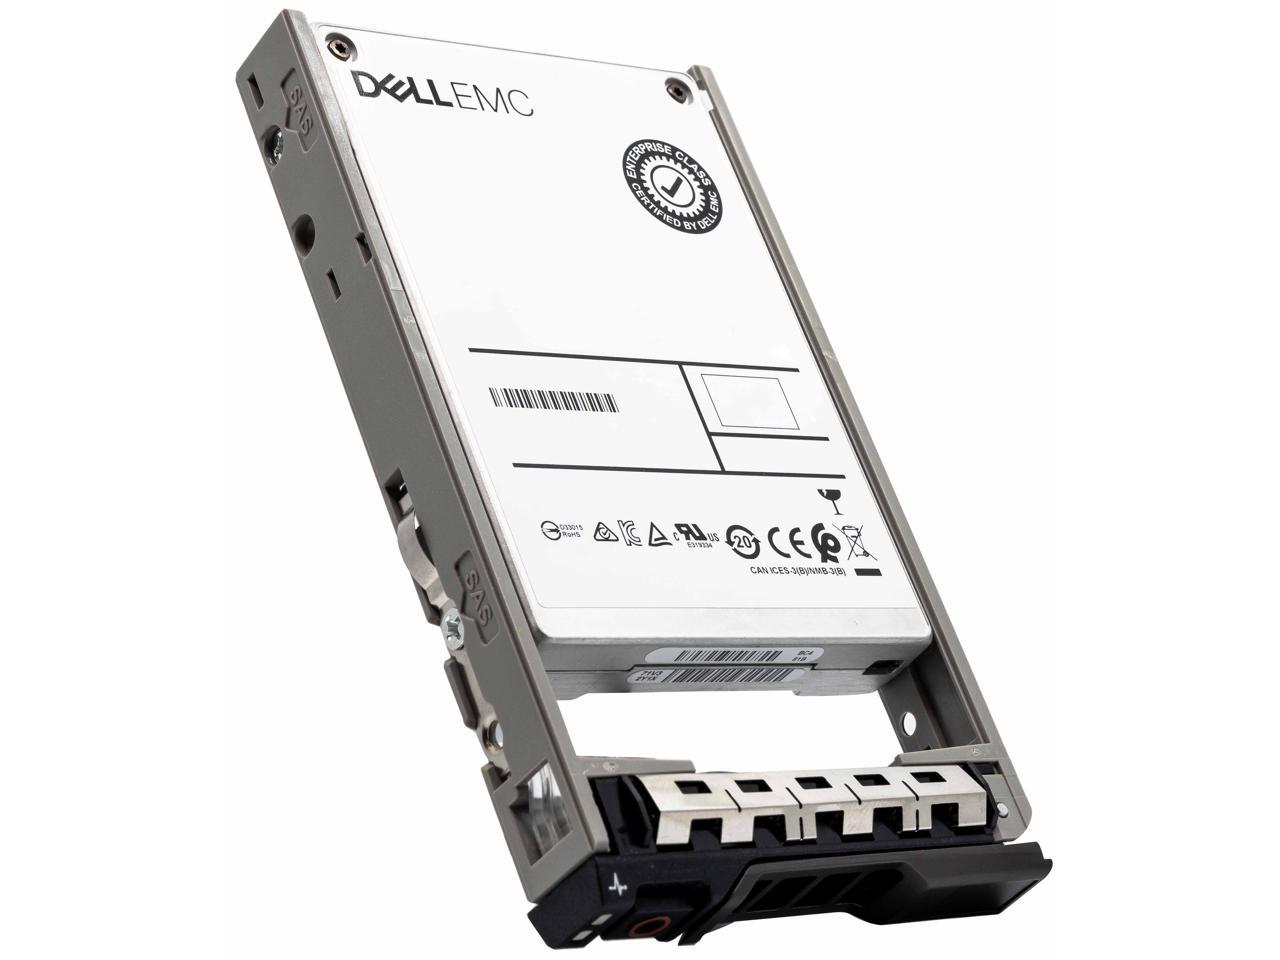 Dell G13 0RVCY3 800GB SAS 12Gb/s 2.5" Solid State Drive